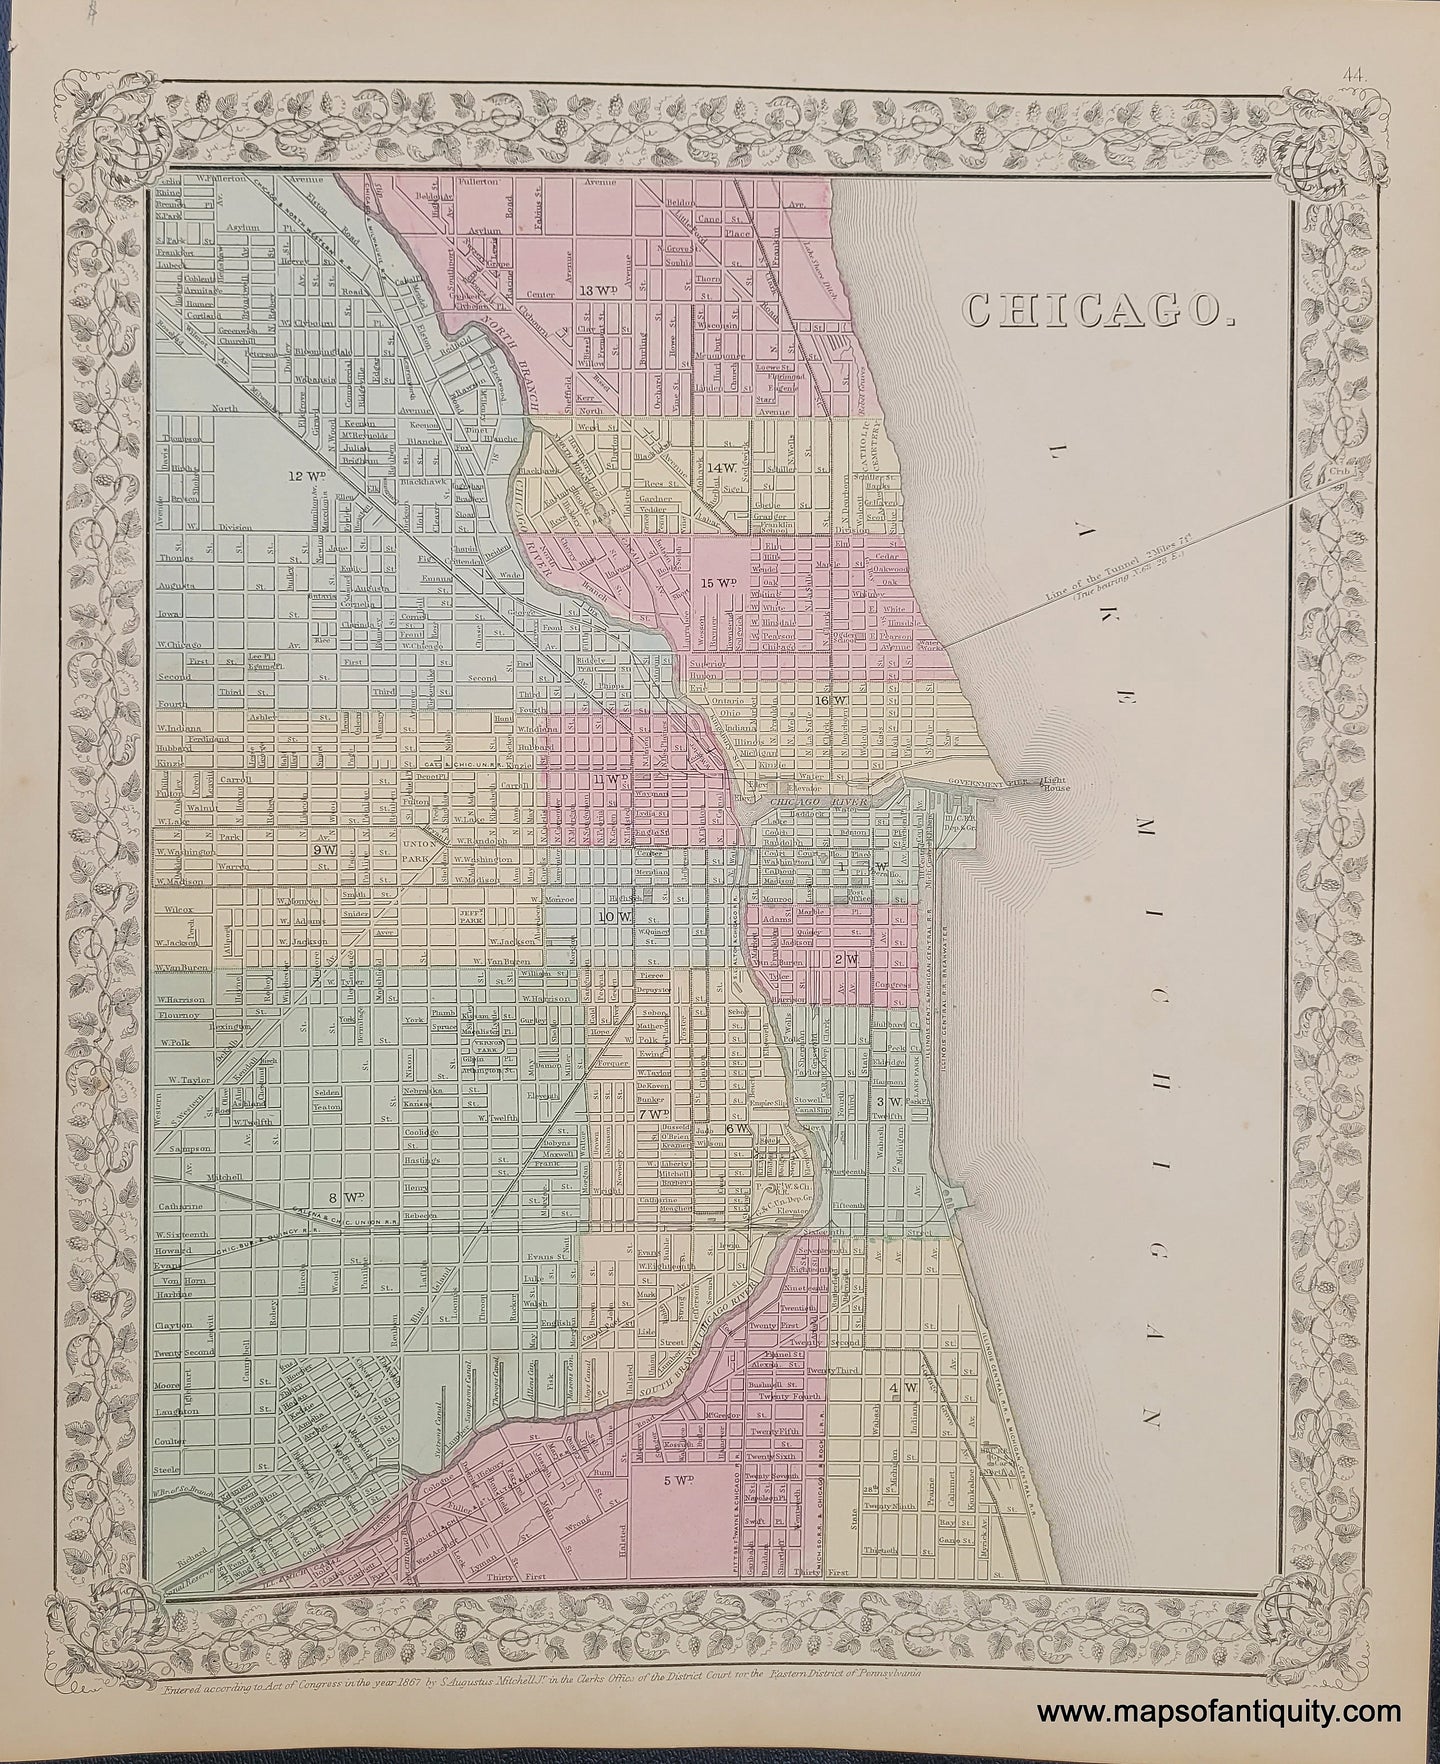 Antique-Map-City-Chicago-Illinois-Mitchell-1868-1860s-1800s-Mid-Late-19th-Century-Maps-of-Antiquity